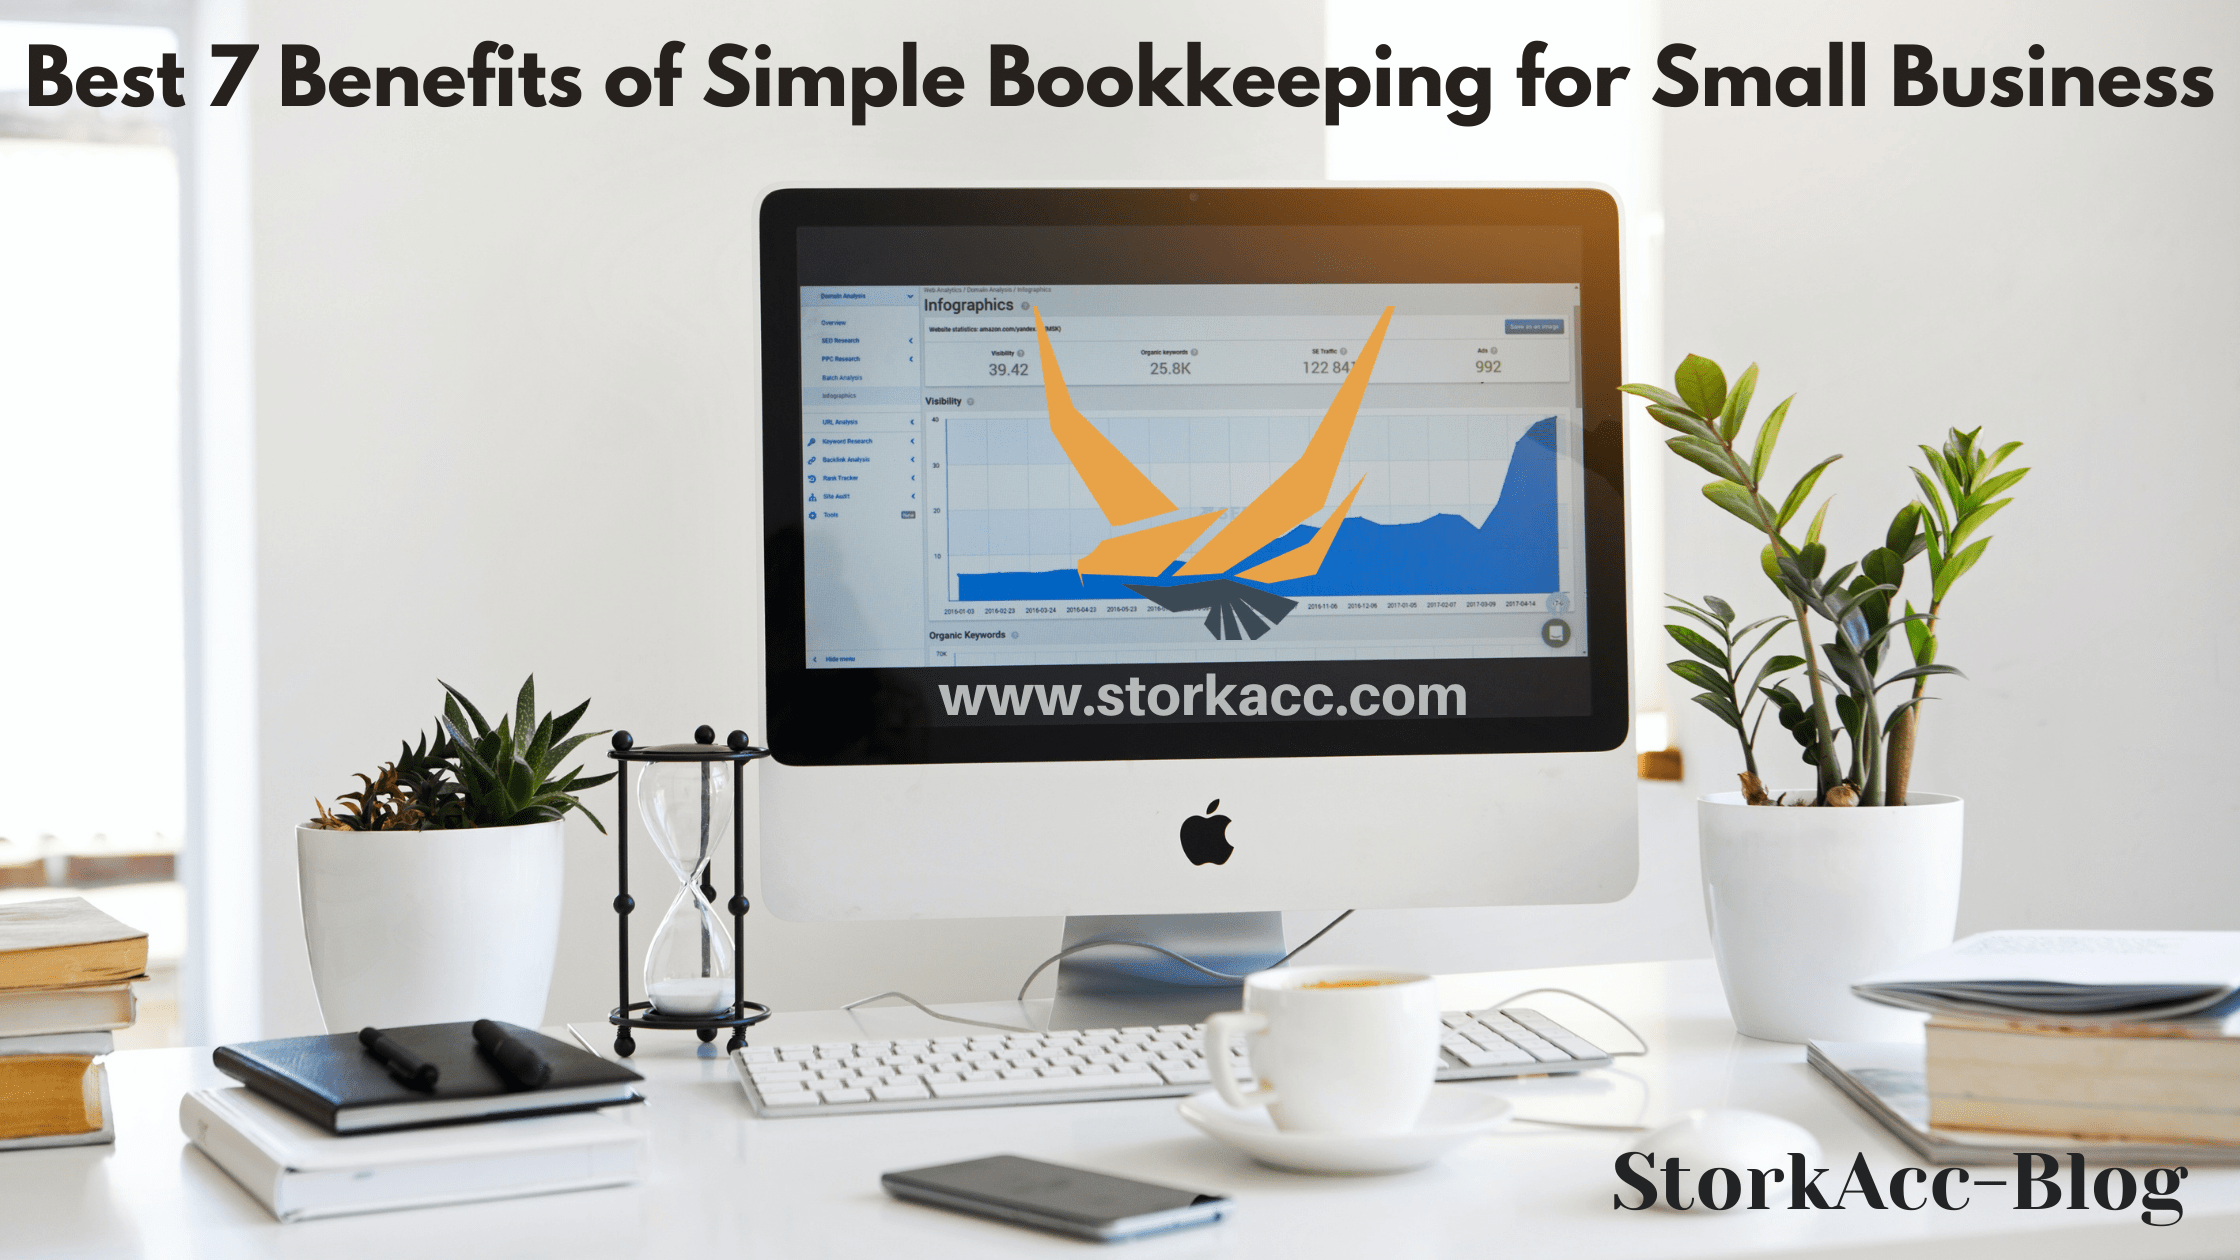 Best 7 Benefits of Simple Bookkeeping for Small Business